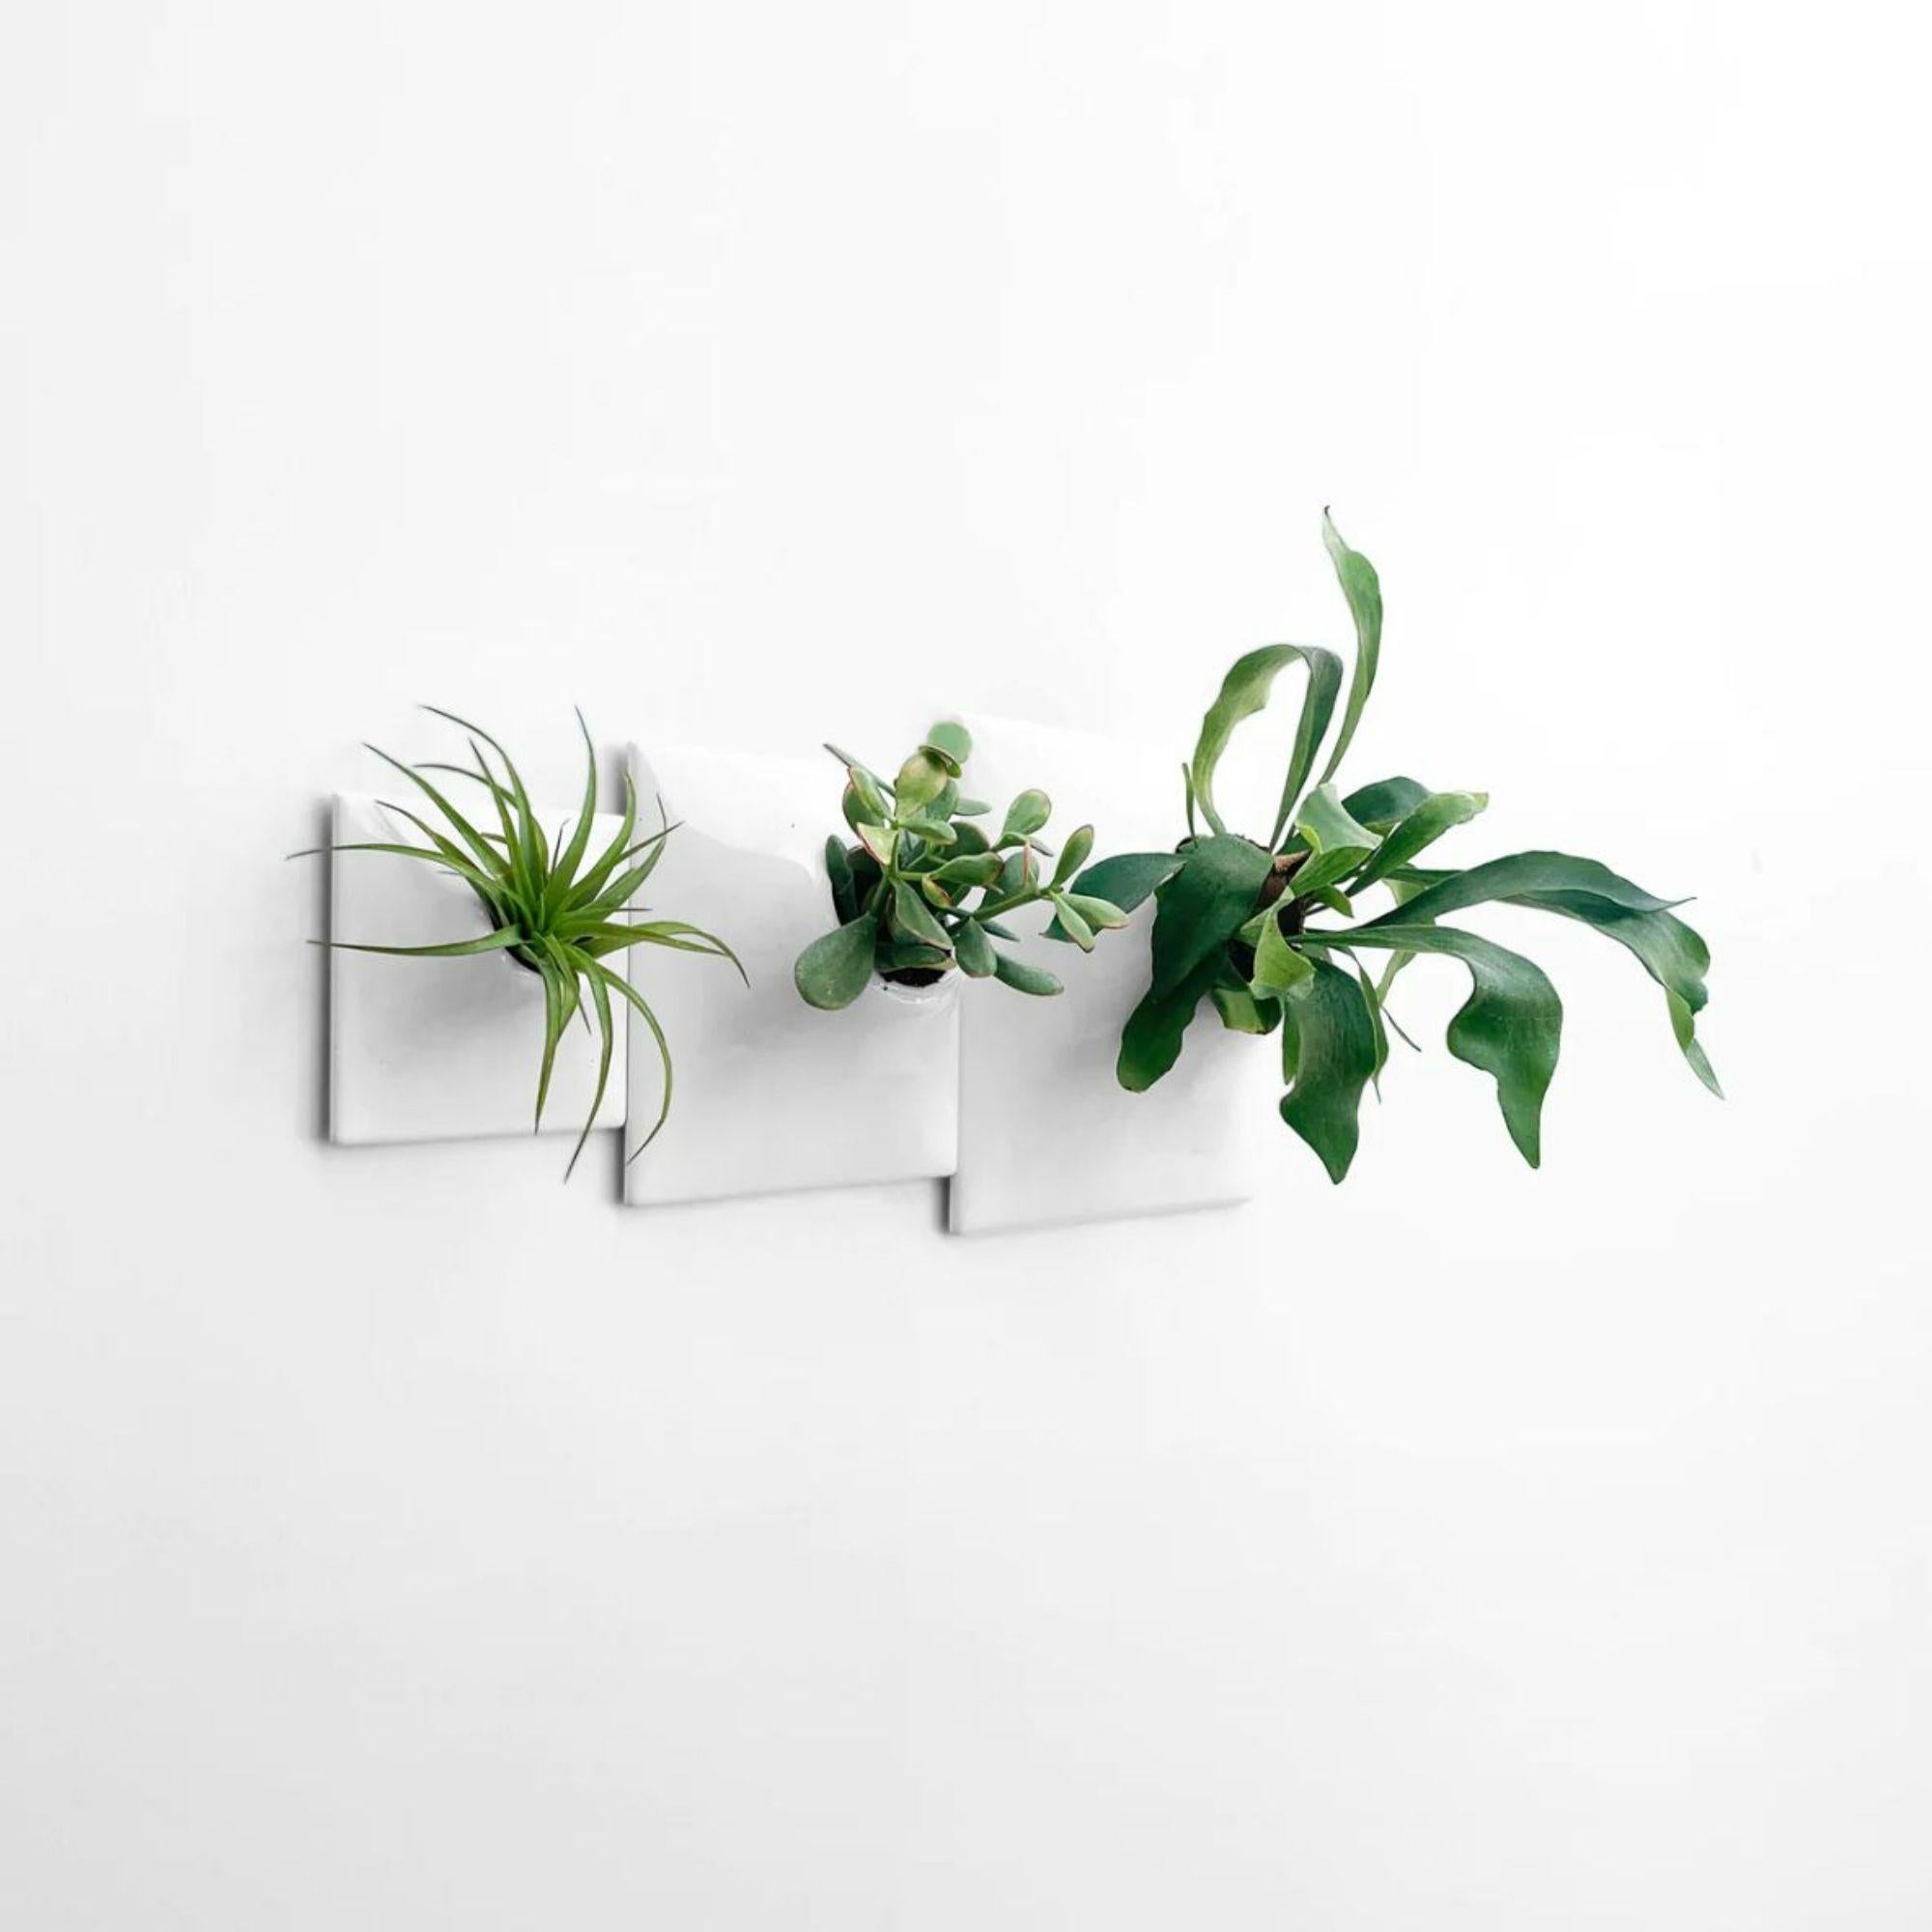 Modern White Wall Planter Set, Mid Century Modern Decor, Plant Wall Art, Node TP

Take your modern wall art to the next level by creating a dynamic and intriguing living wall or modular plant wall in your home or office with this Node Wall Planter